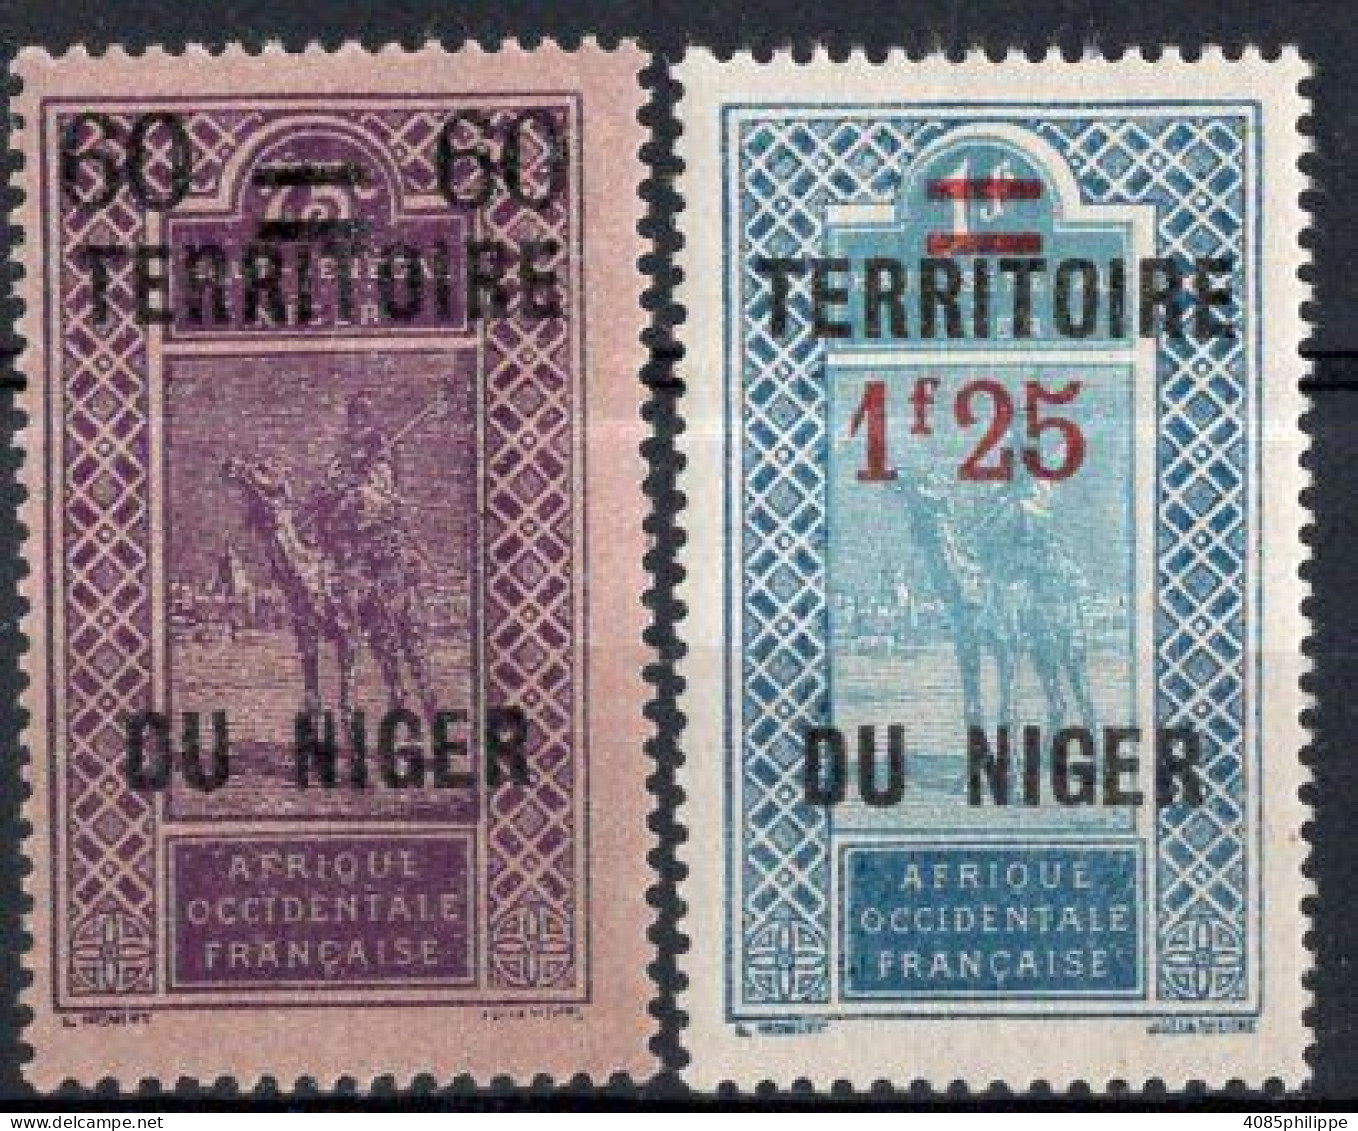 NIGER Timbres-poste N°21* & 24* Neufs Charnières Cote : 2€00 - Unused Stamps